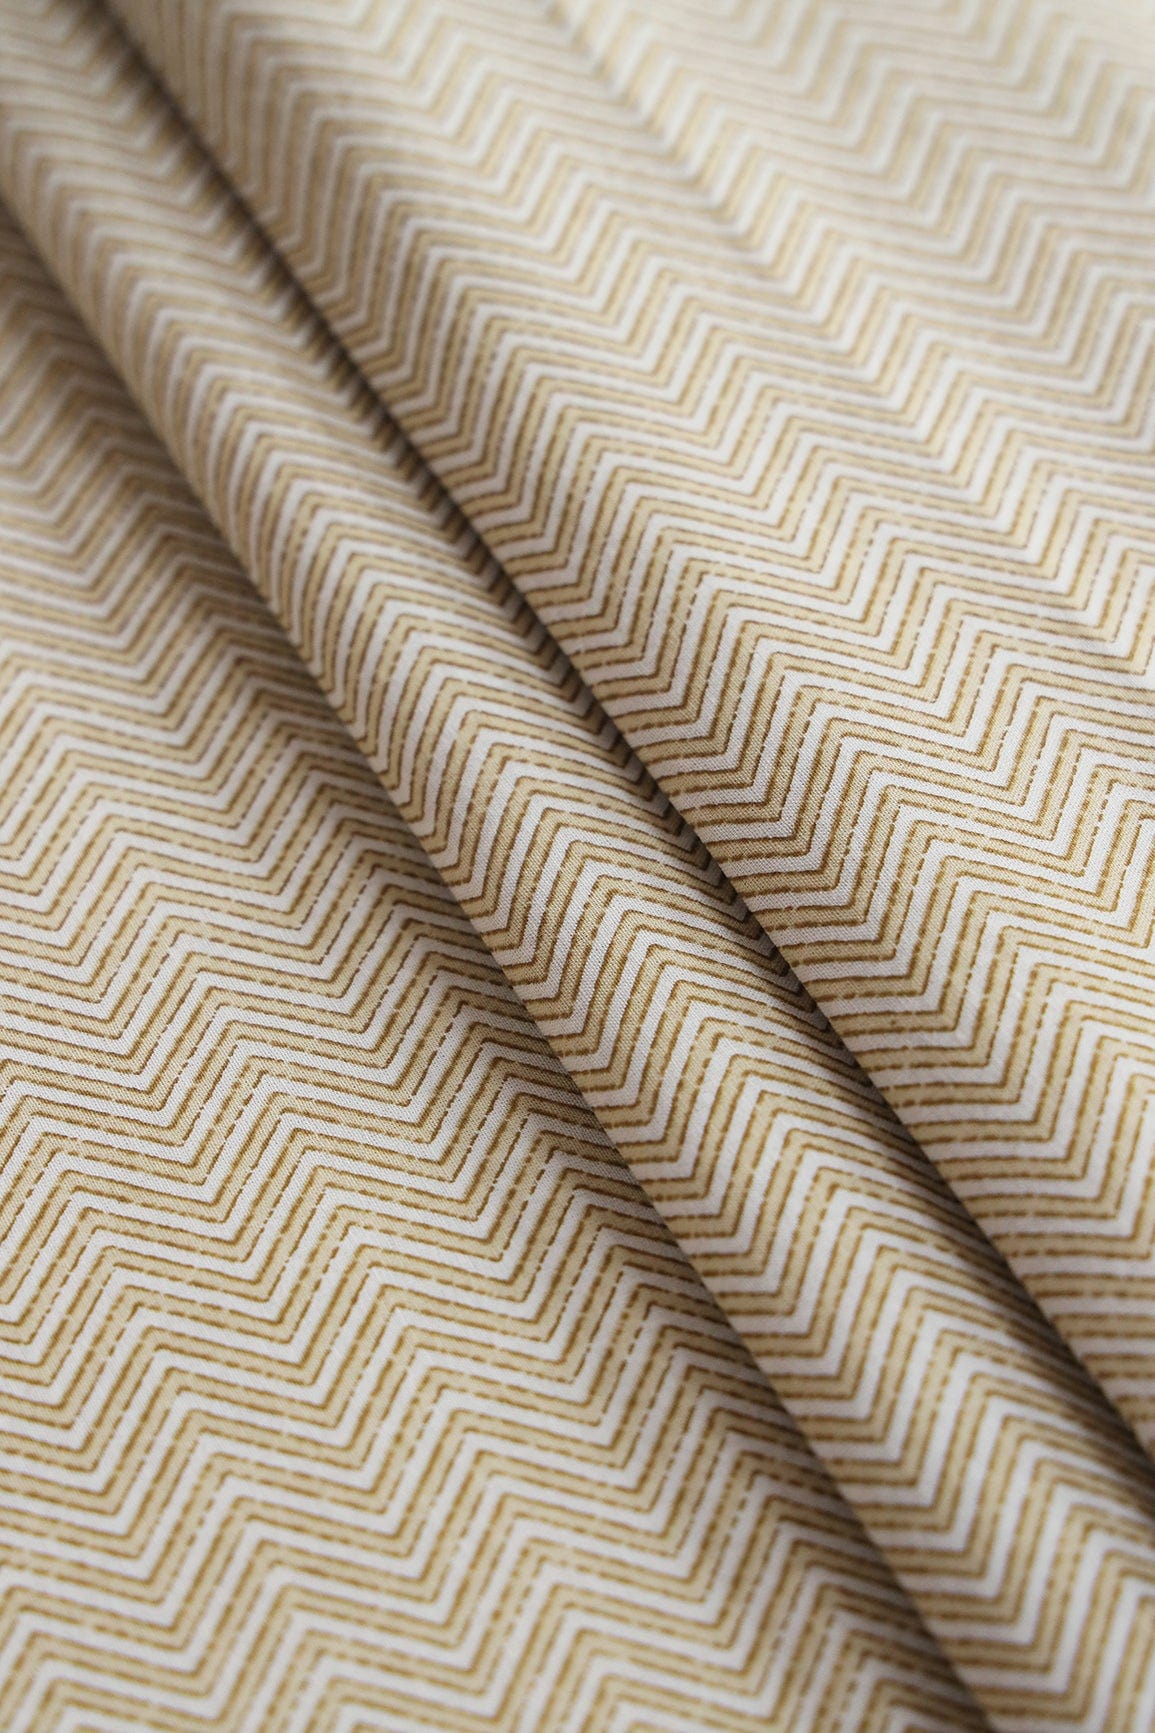 doeraa Prints Beige And Olive Chevron Print On Pure Mul Cotton Fabric